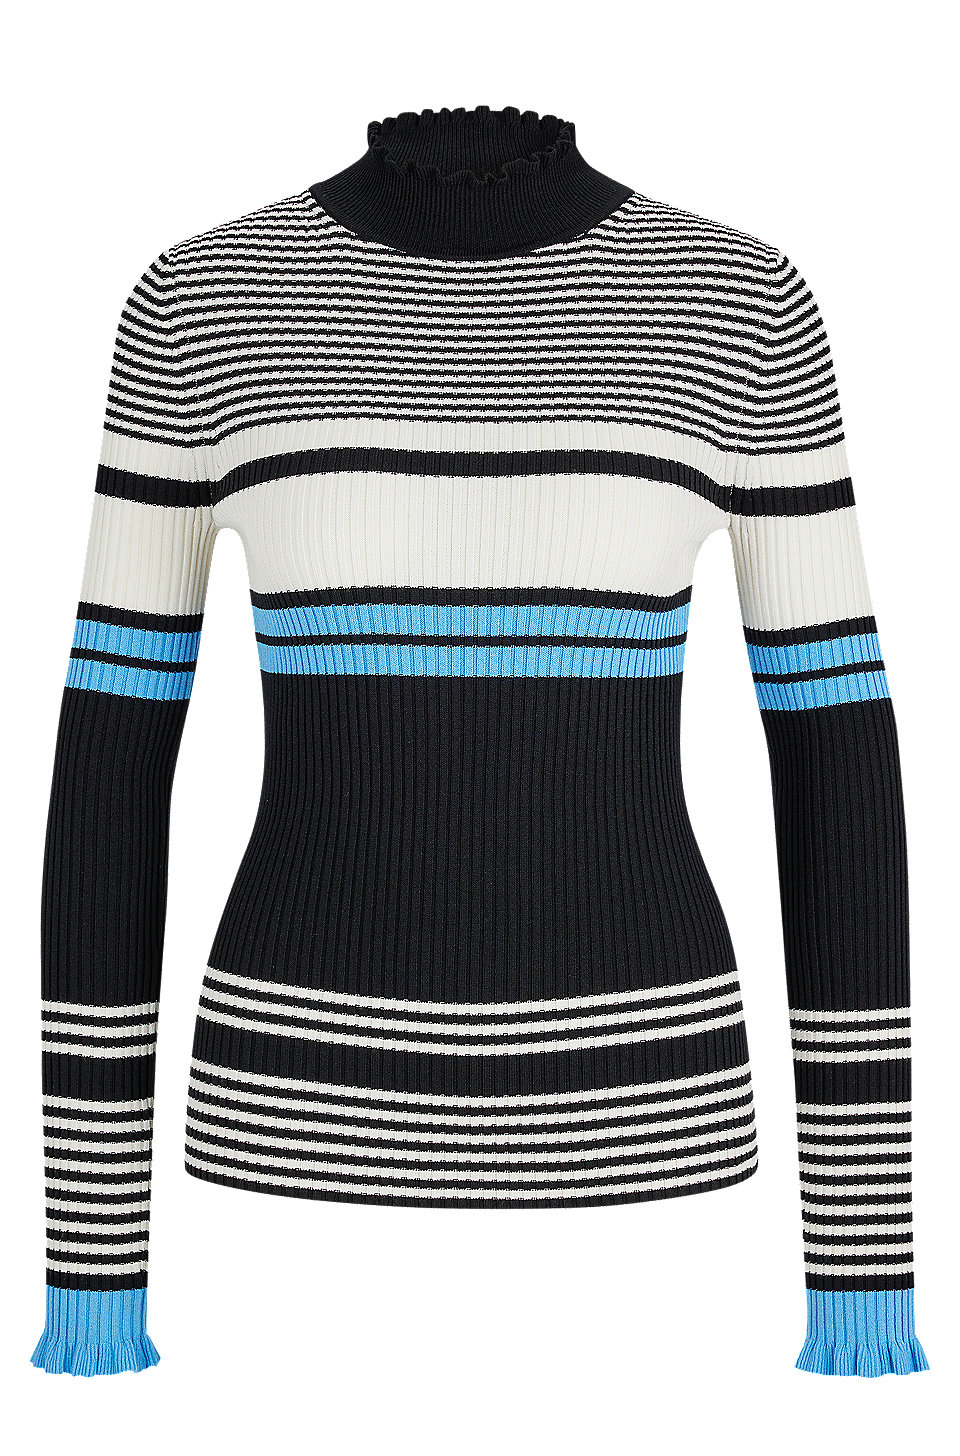 BOSS - Slim-fit striped sweater with ruffled neckline and cuffs